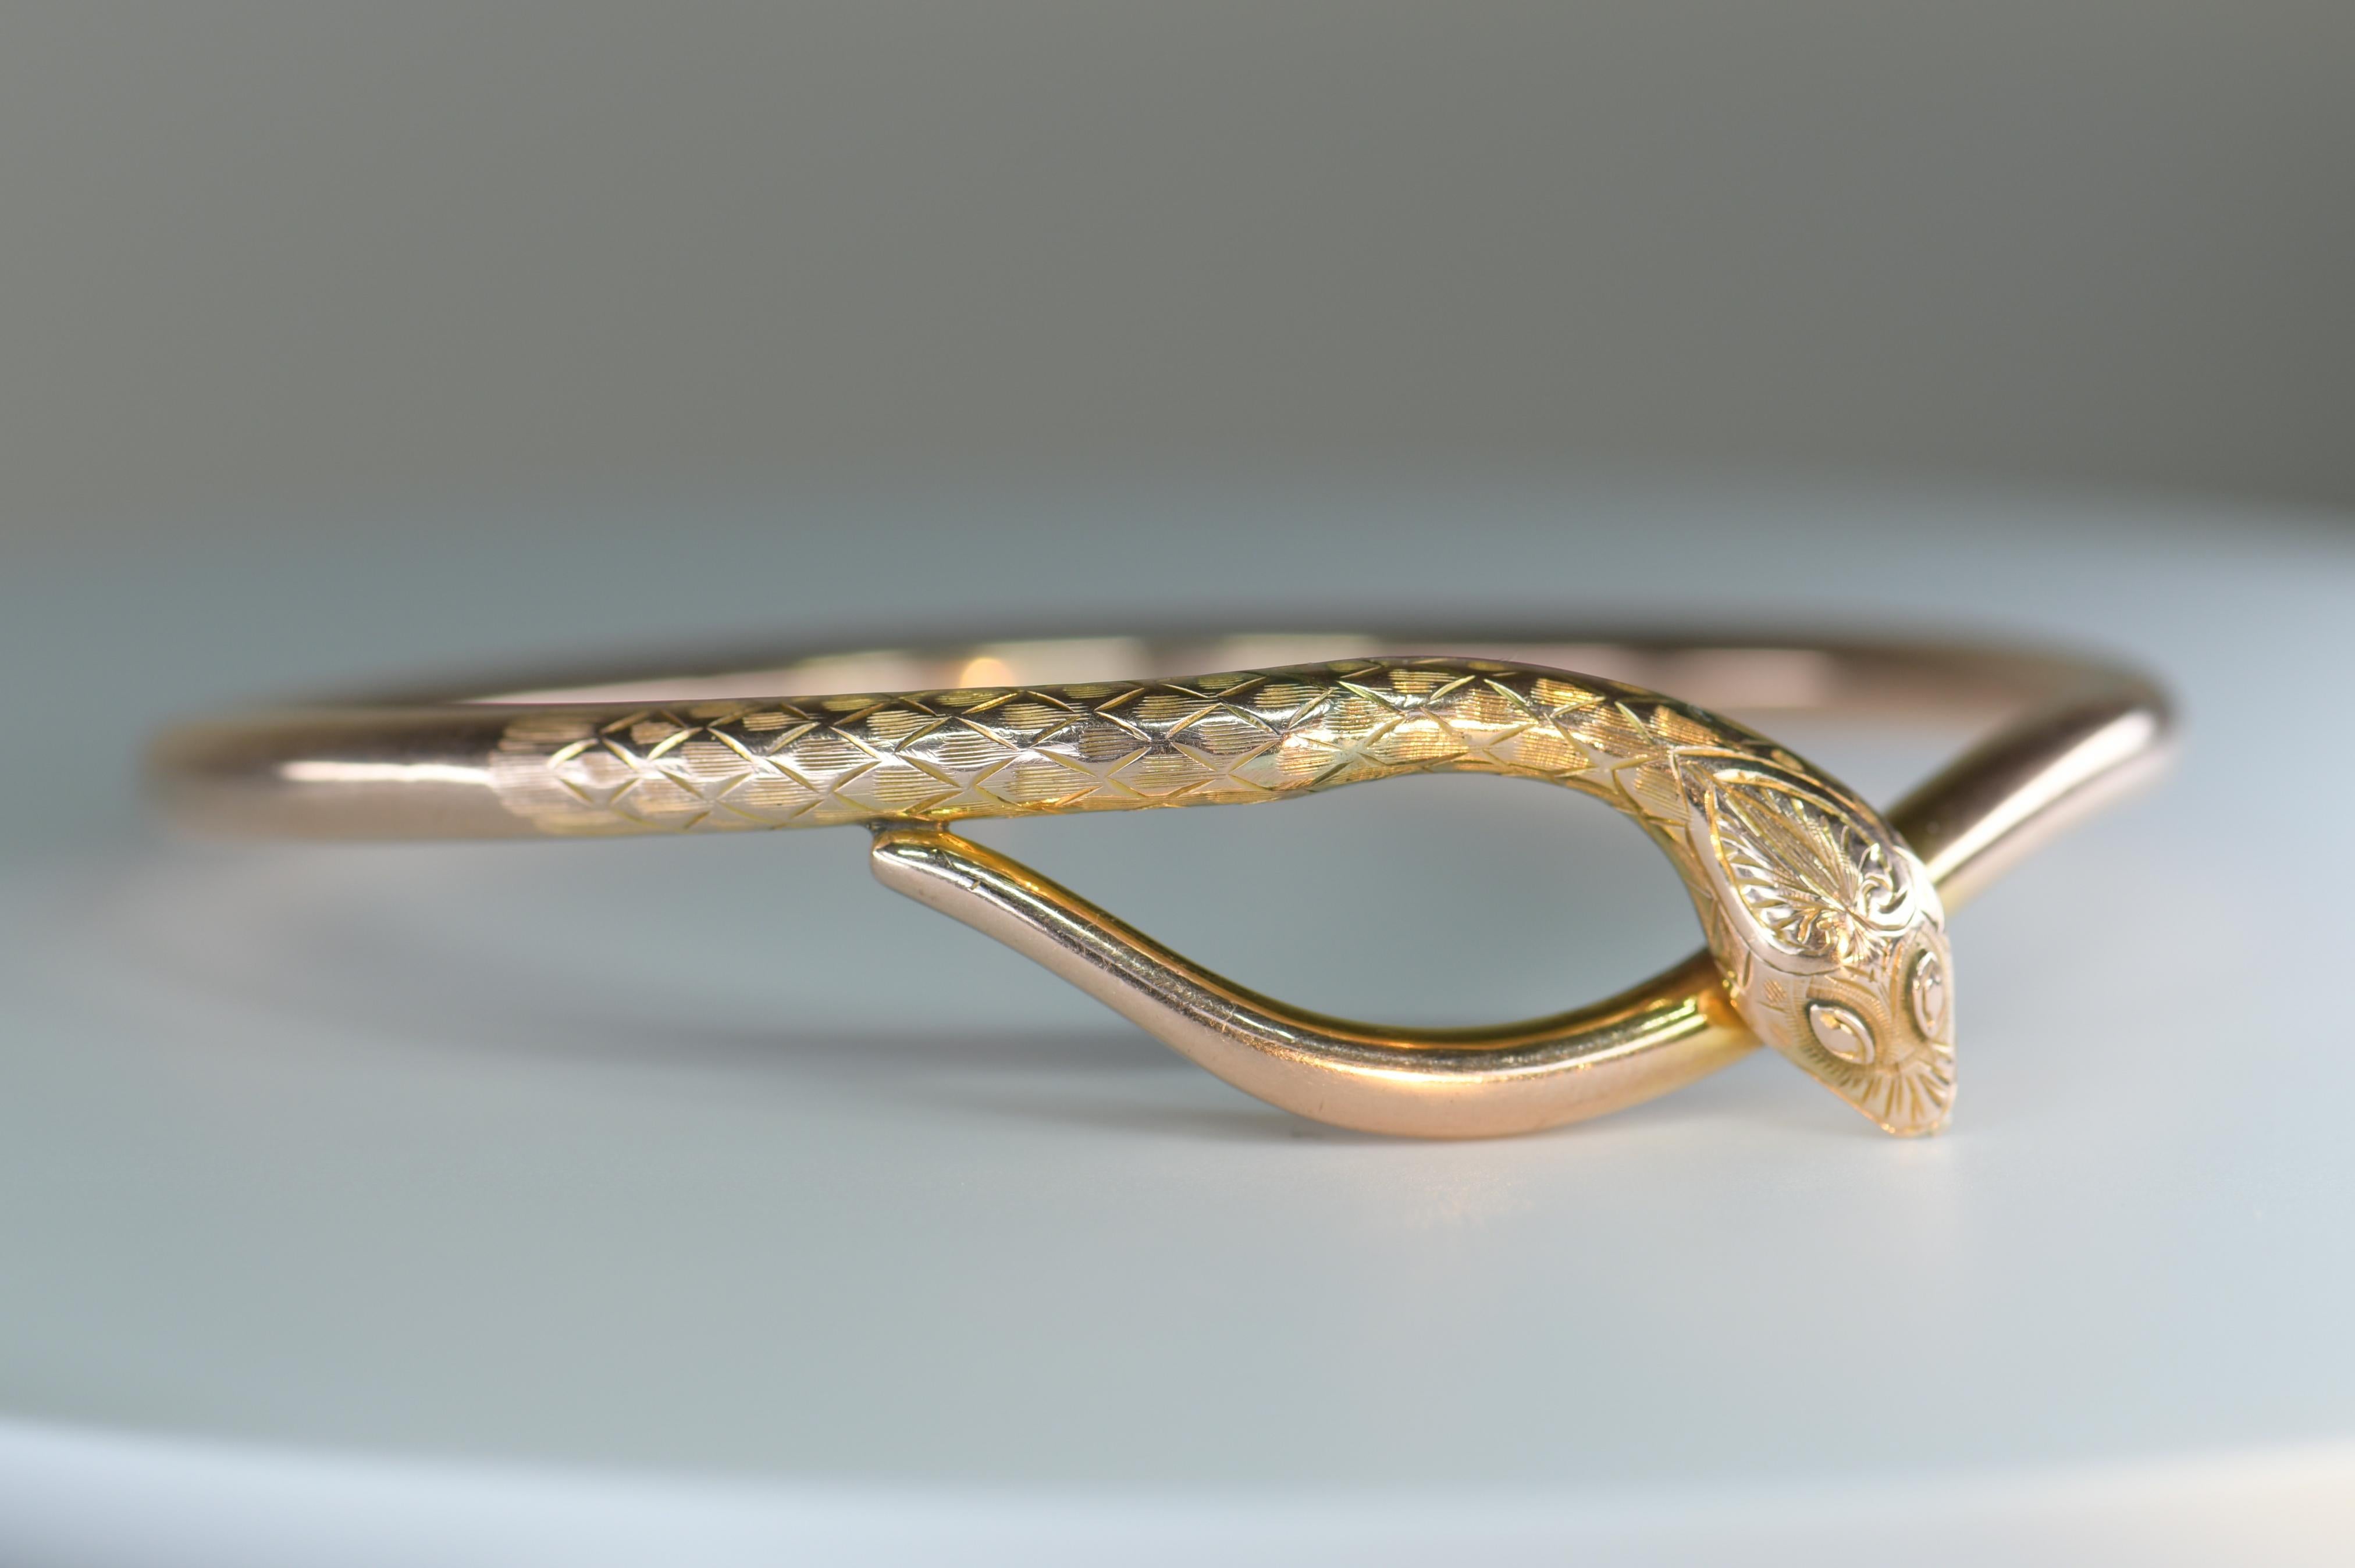 A very attractive Victorian snake bangle and armband. It was modeled as a coiled snake with engraved detail to head. Snake motifs are one of the earliest historical and mythological symbols that had significance in almost every culture.